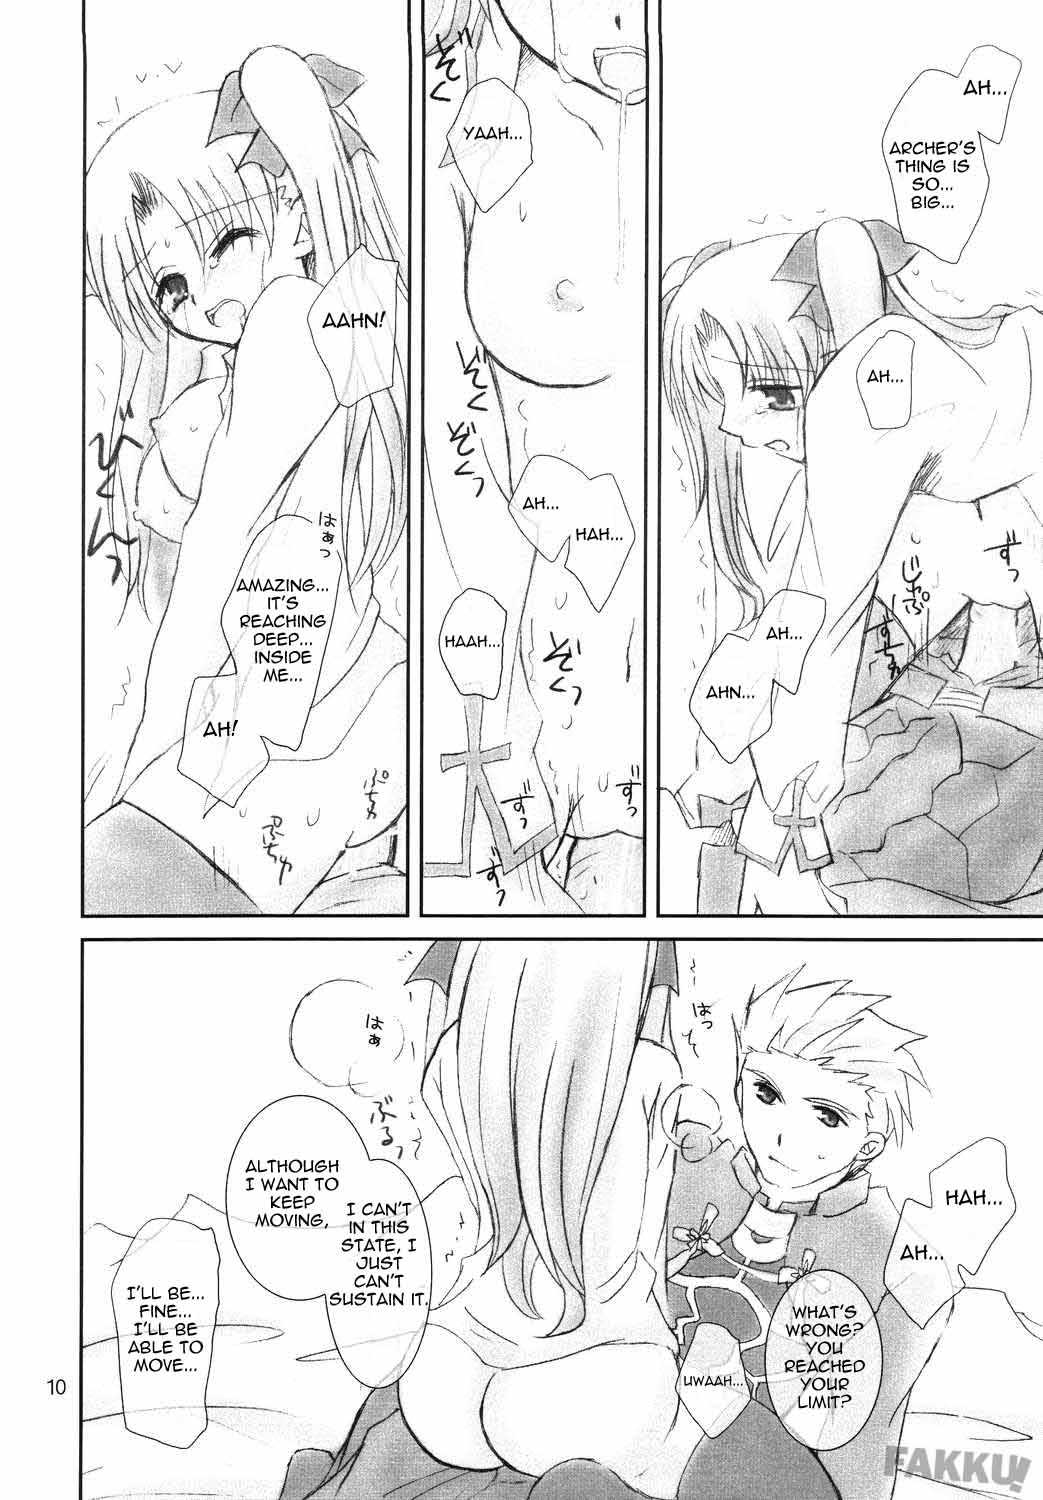 [Fate Stay Night][Happy Water] Restraint [english] 